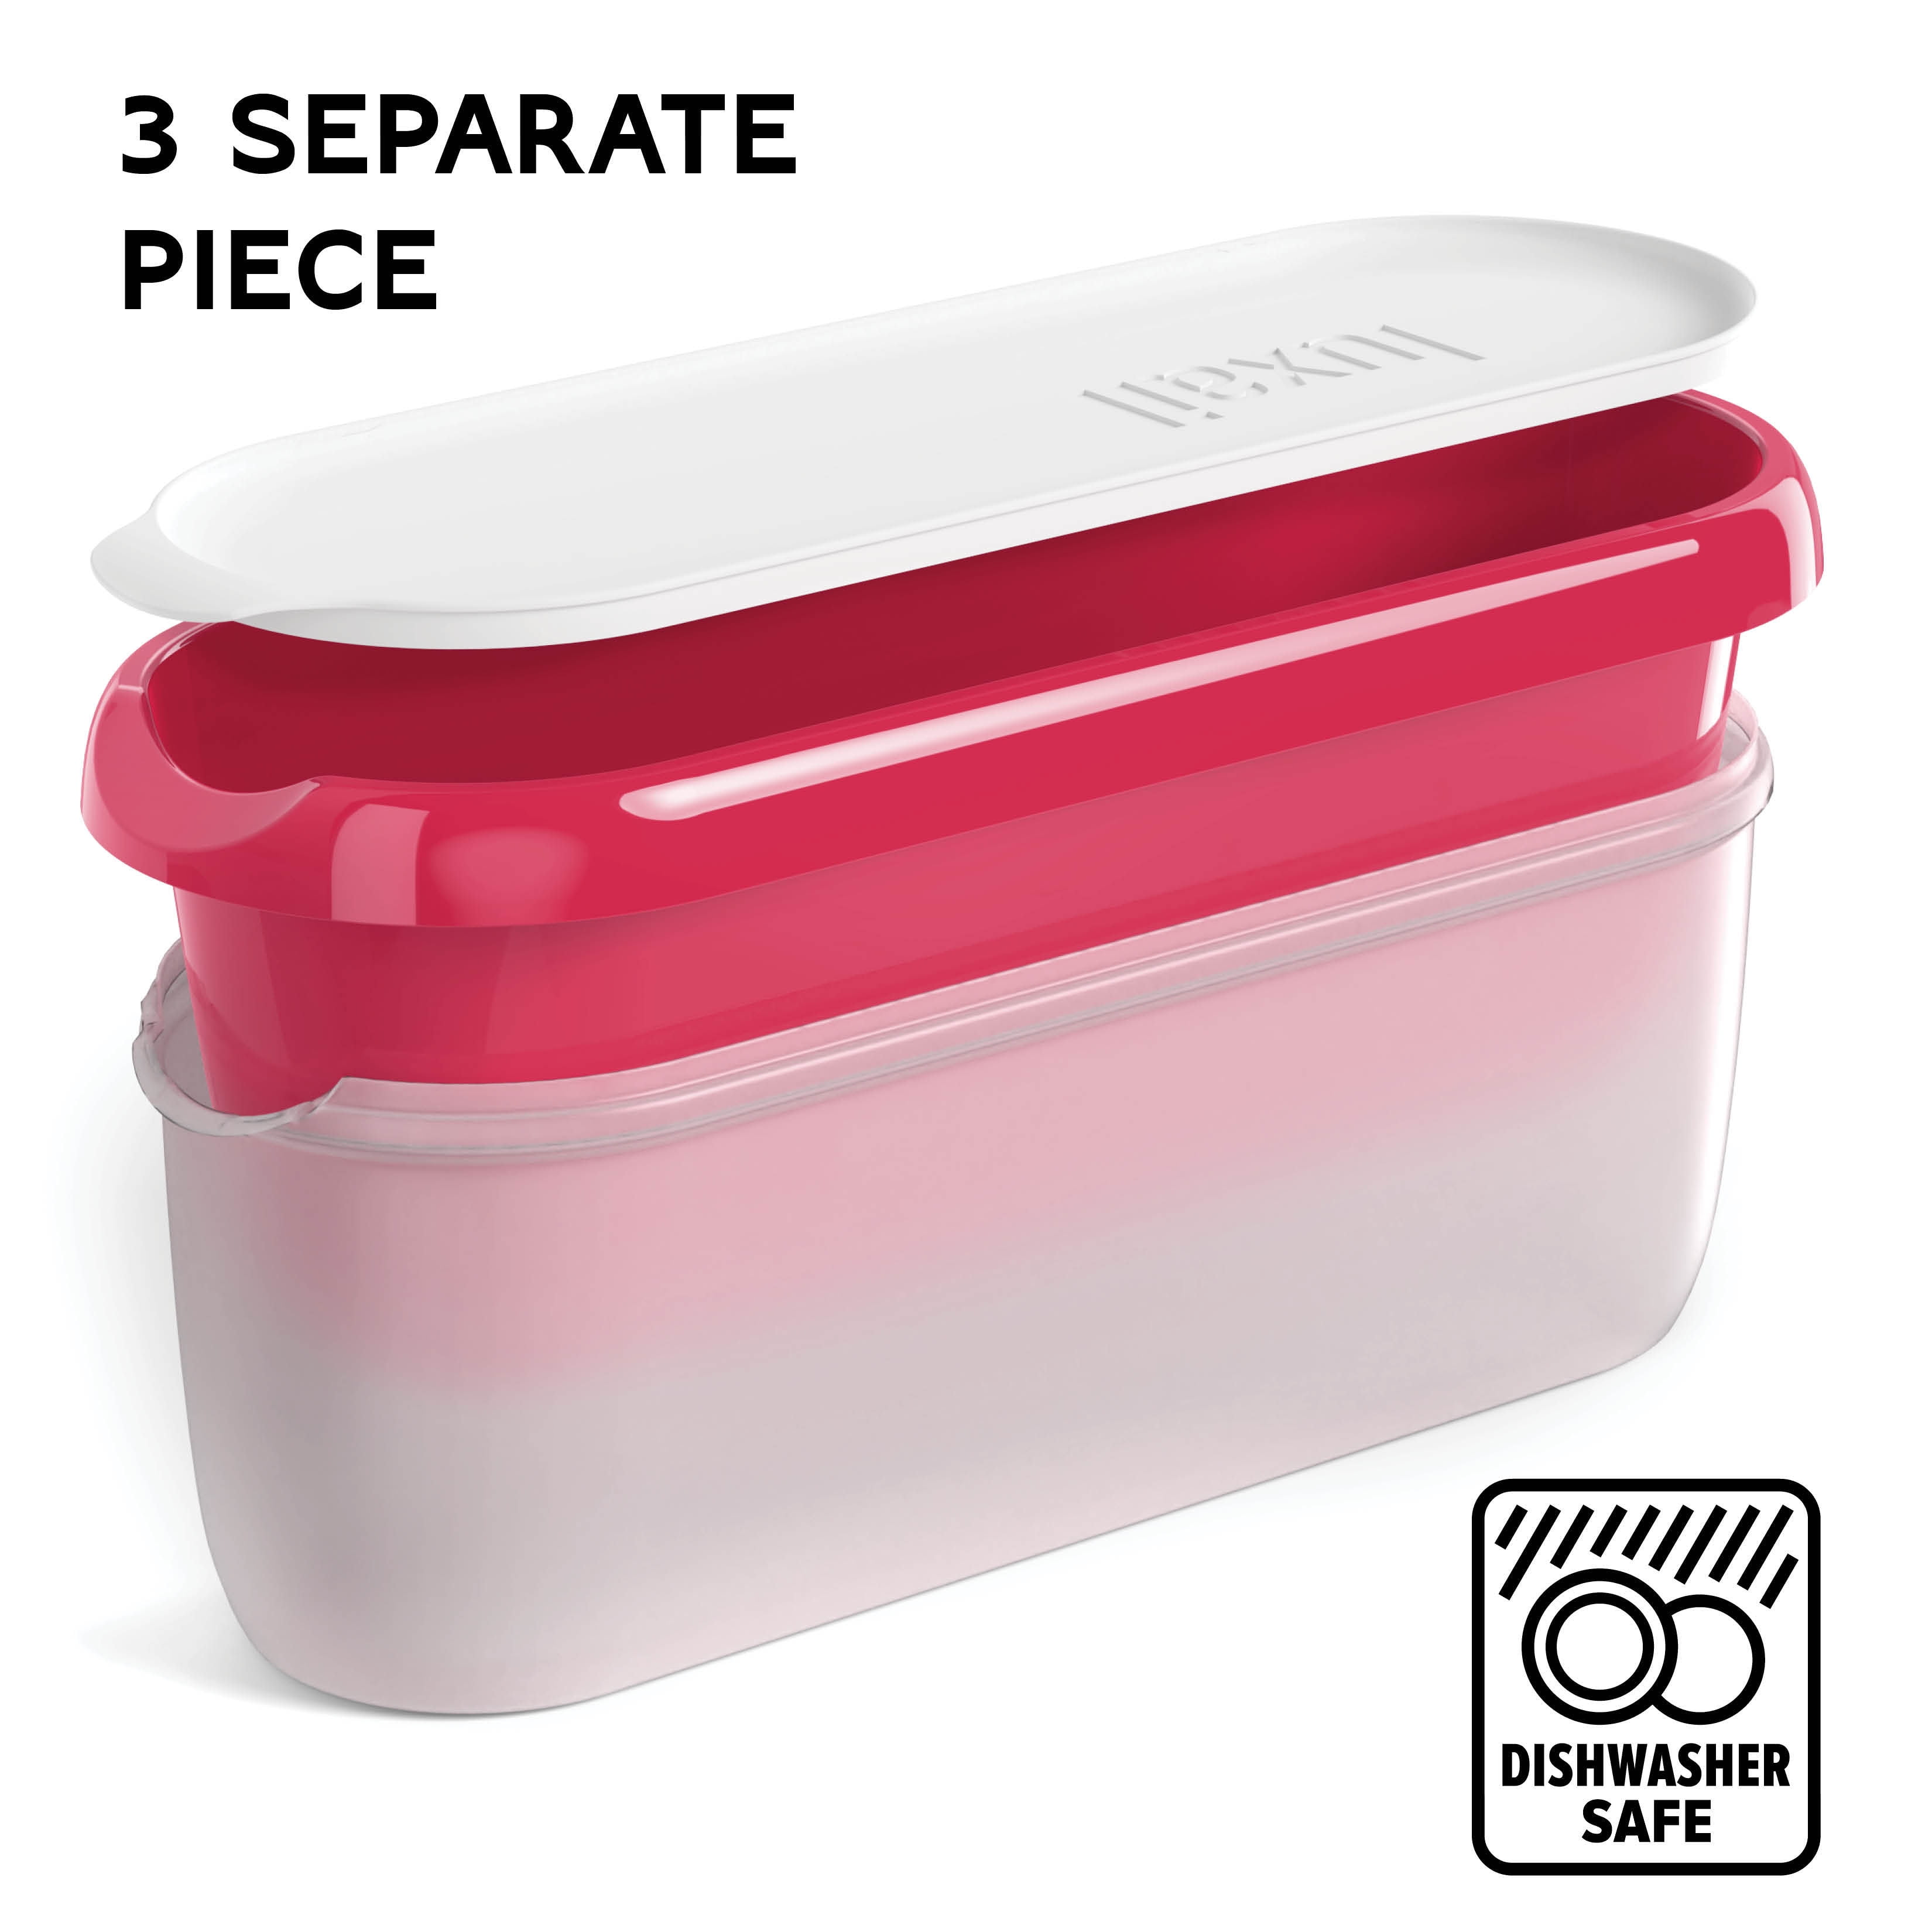 Laxinis World Ice Cream Containers – Pack of 2 Ice Cream Plastic Containers  with lids, 1.5 Quarts, Reusable, with Non-slip Base (Pink)